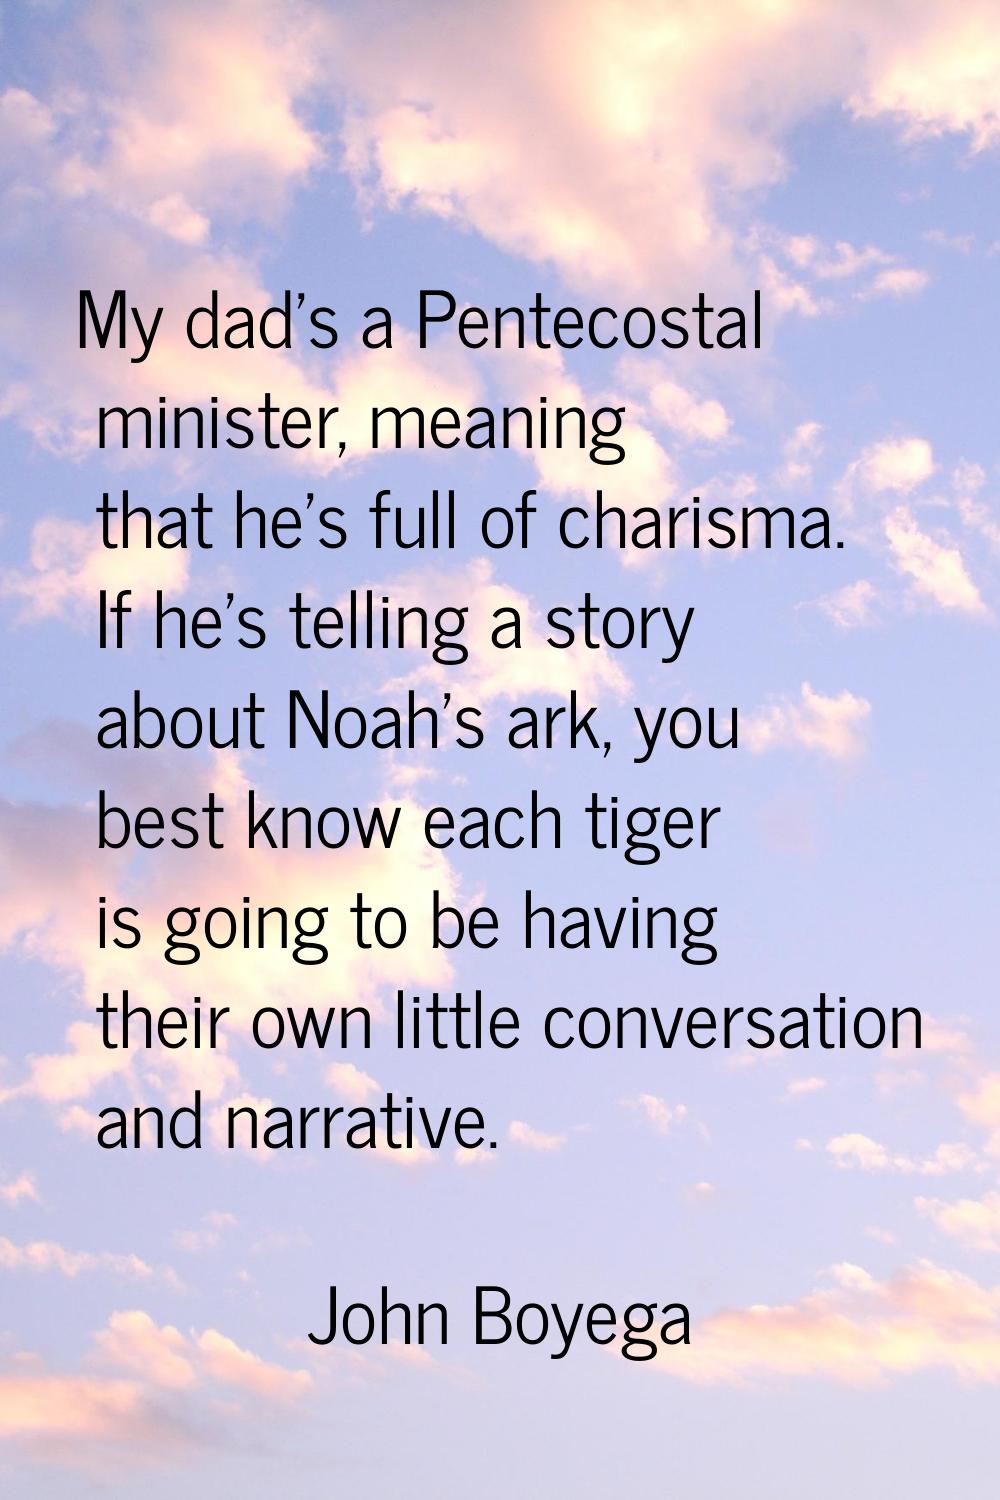 My dad's a Pentecostal minister, meaning that he's full of charisma. If he's telling a story about 